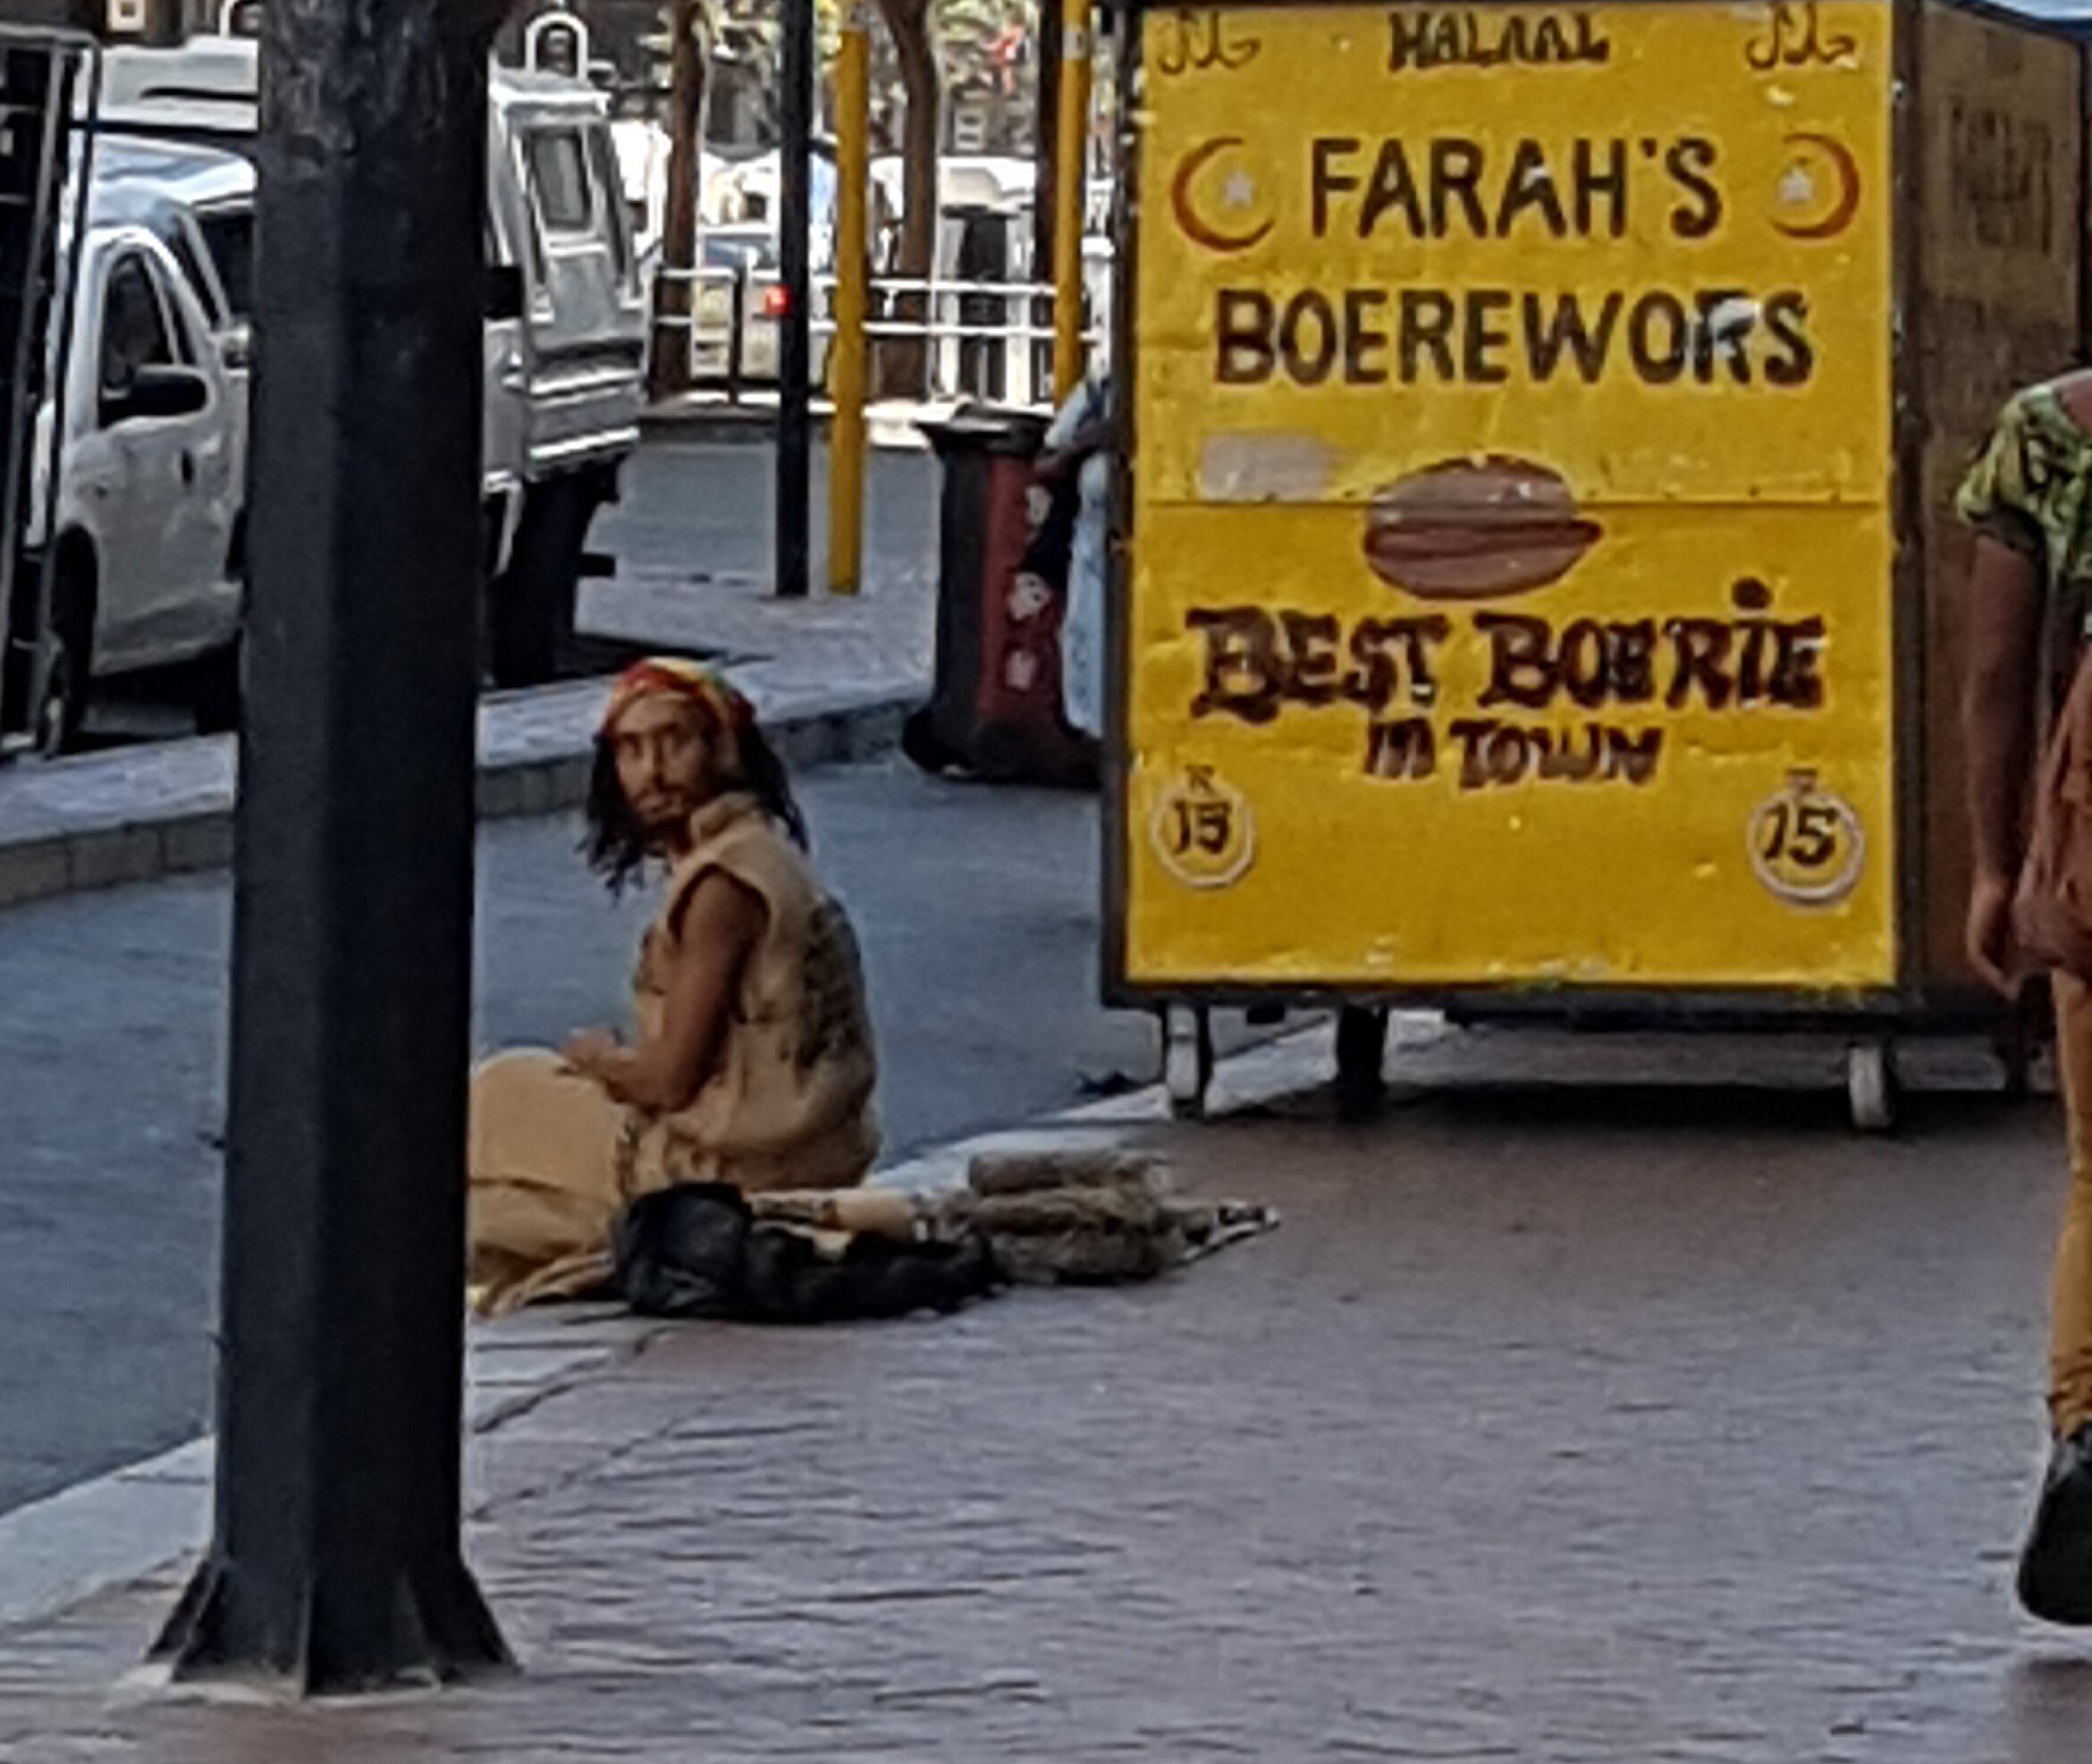 Homeless man on streets of Cape Town